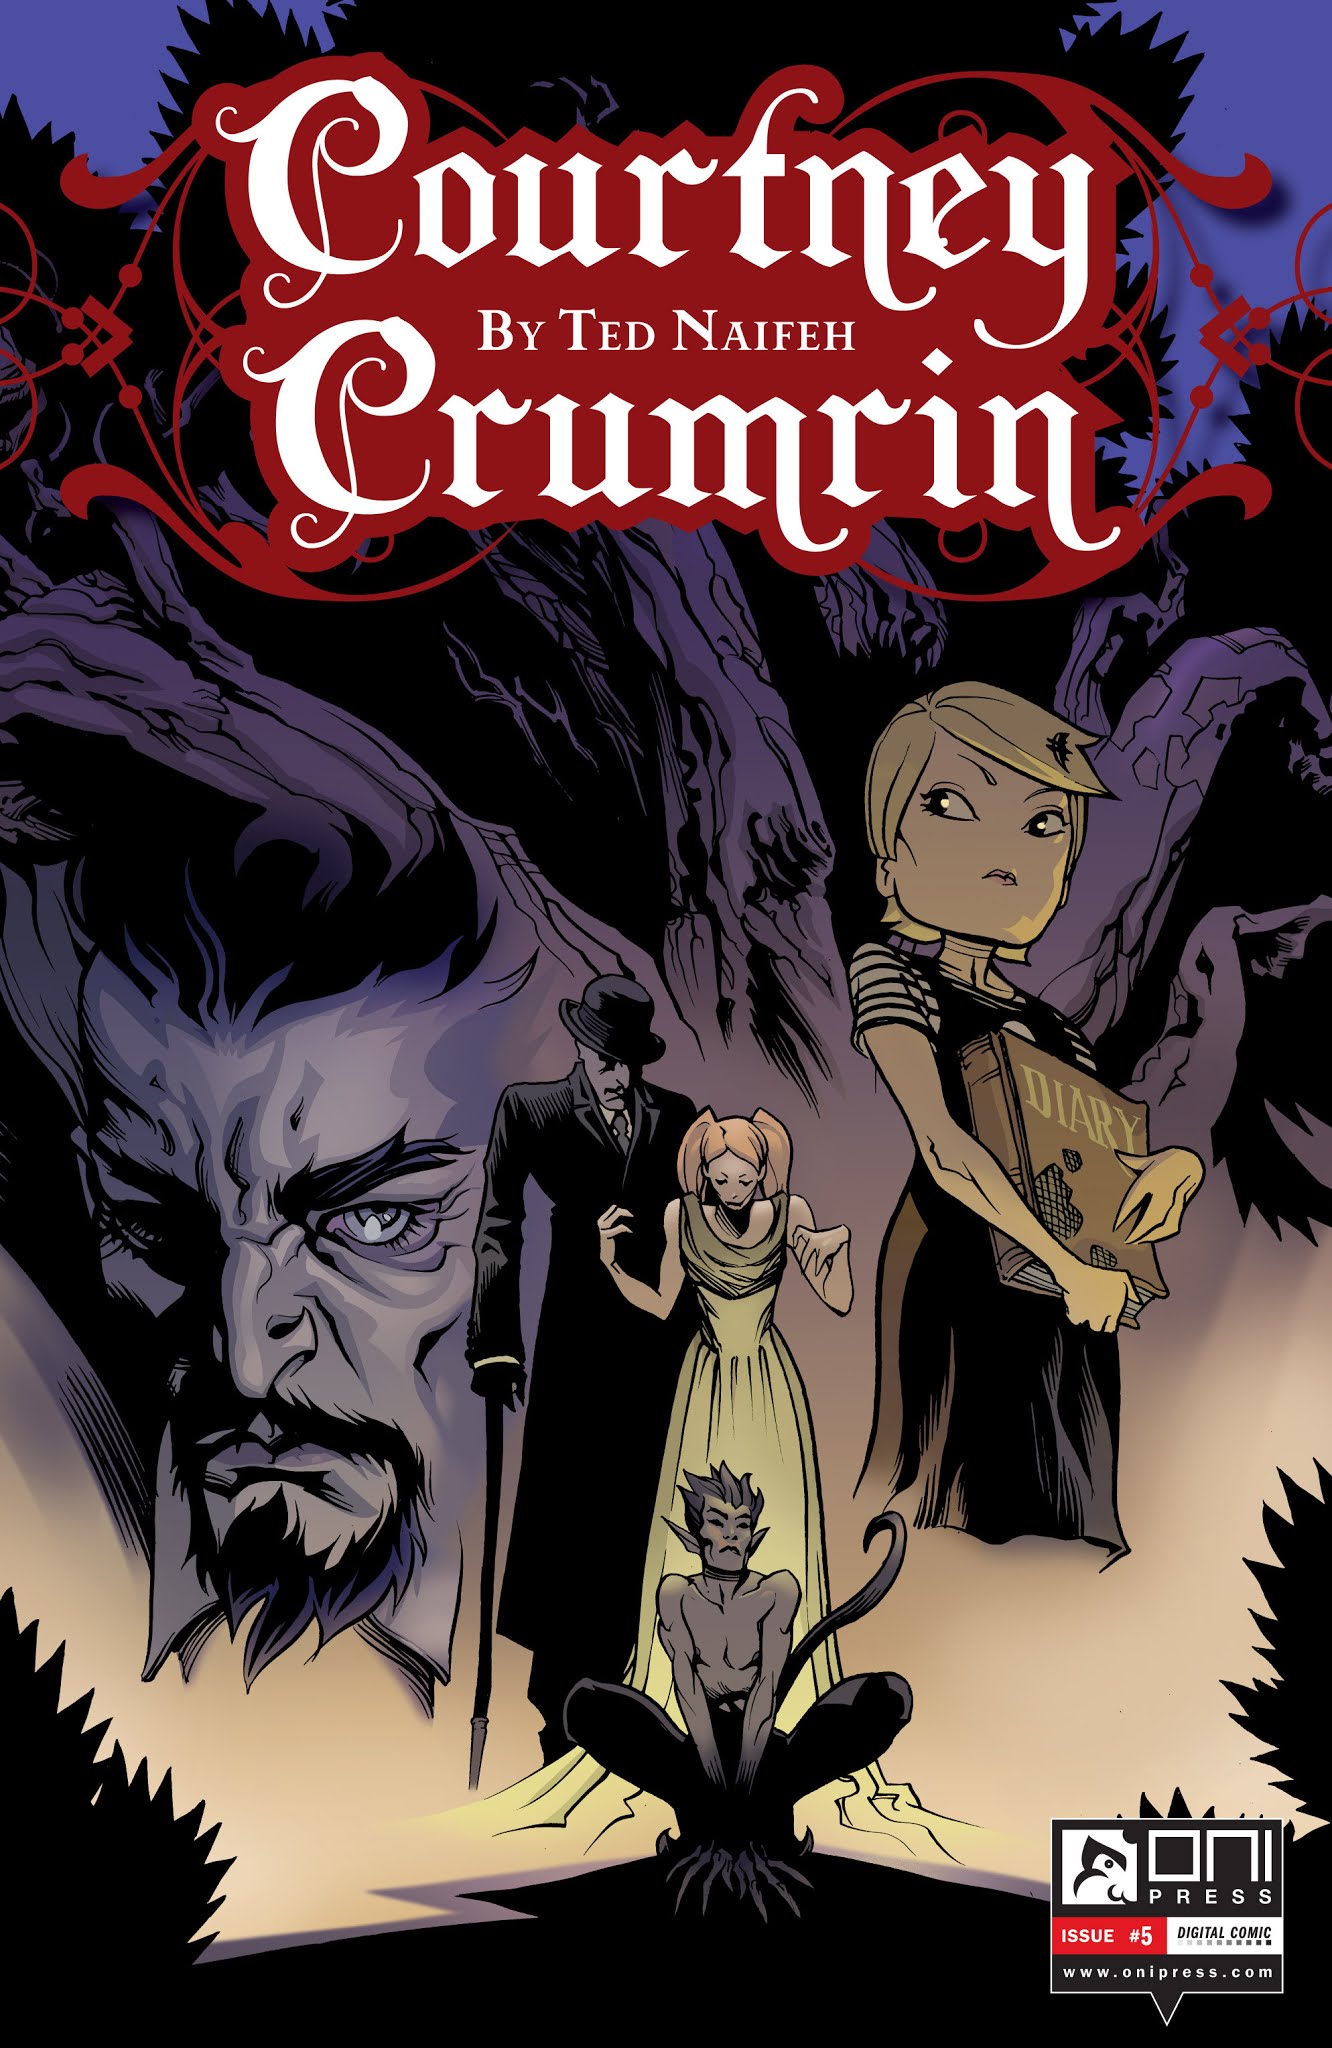 Read online Courtney Crumrin comic -  Issue #5 - 1